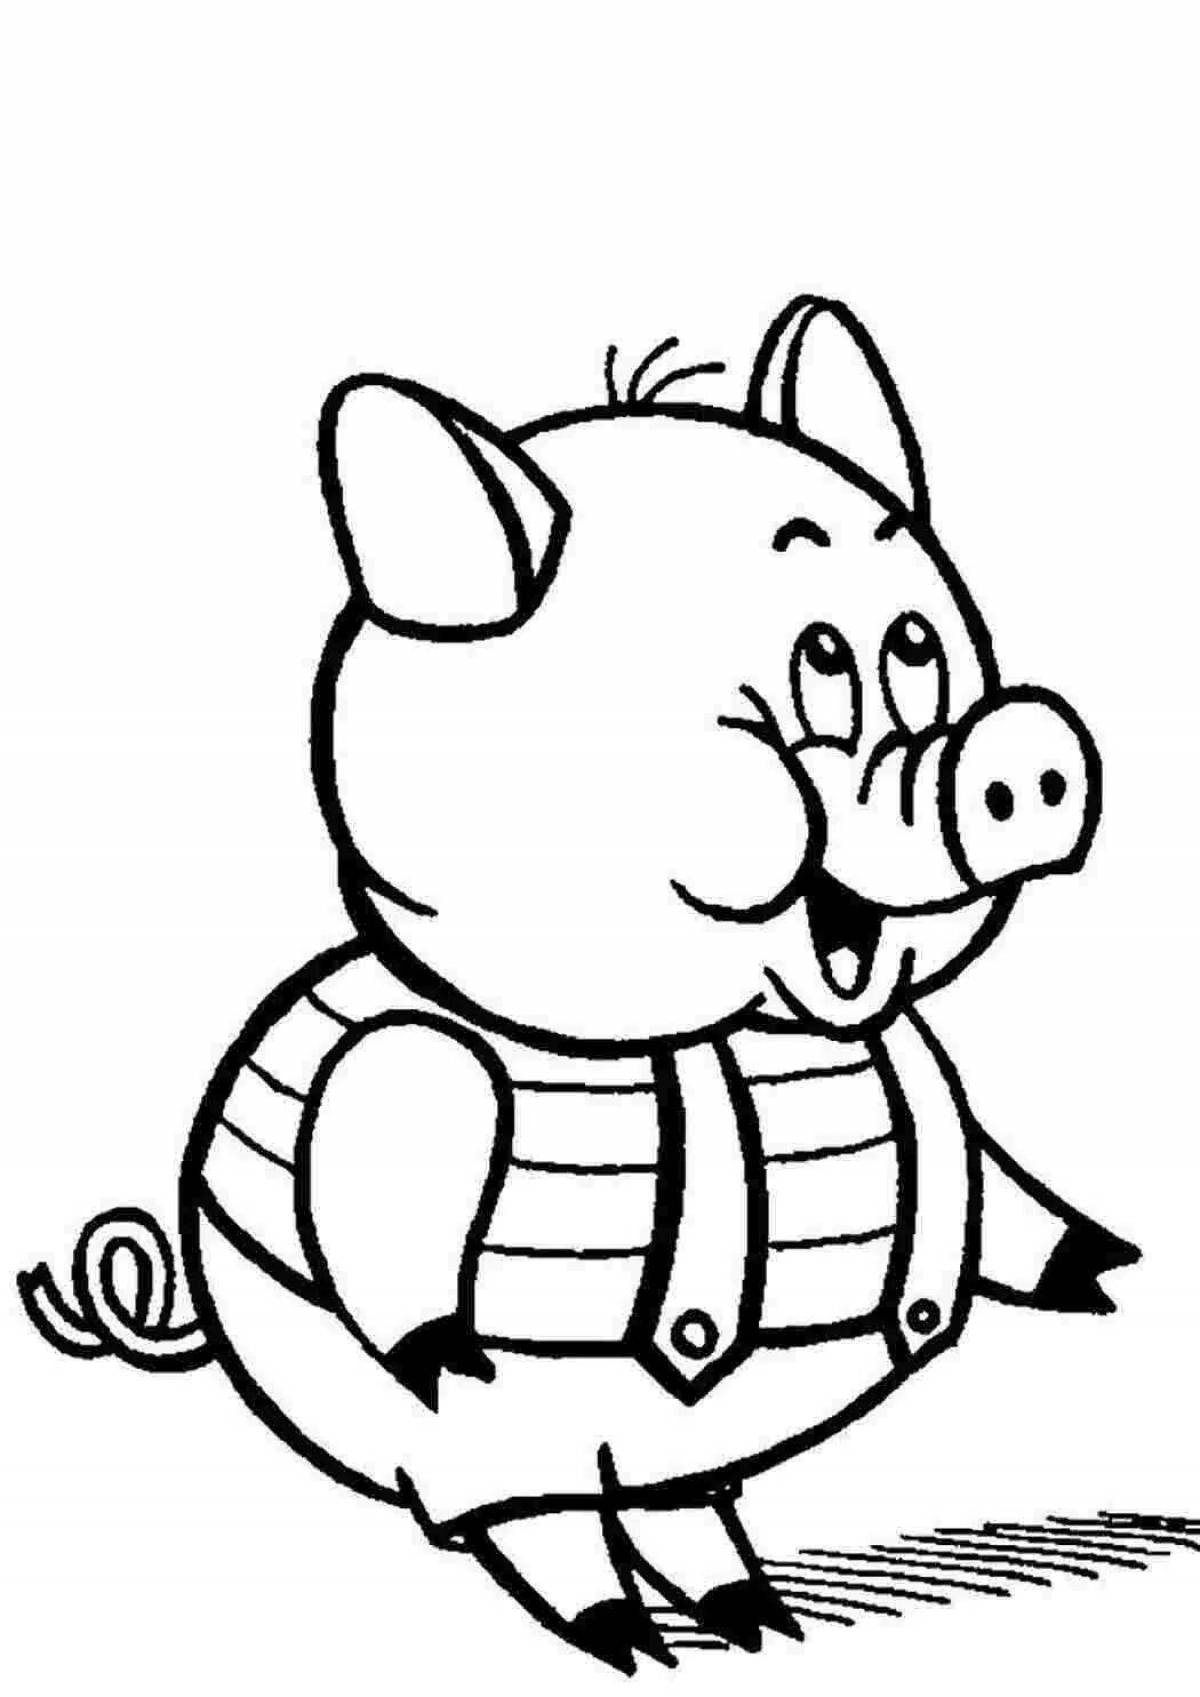 Creative pig coloring for kids